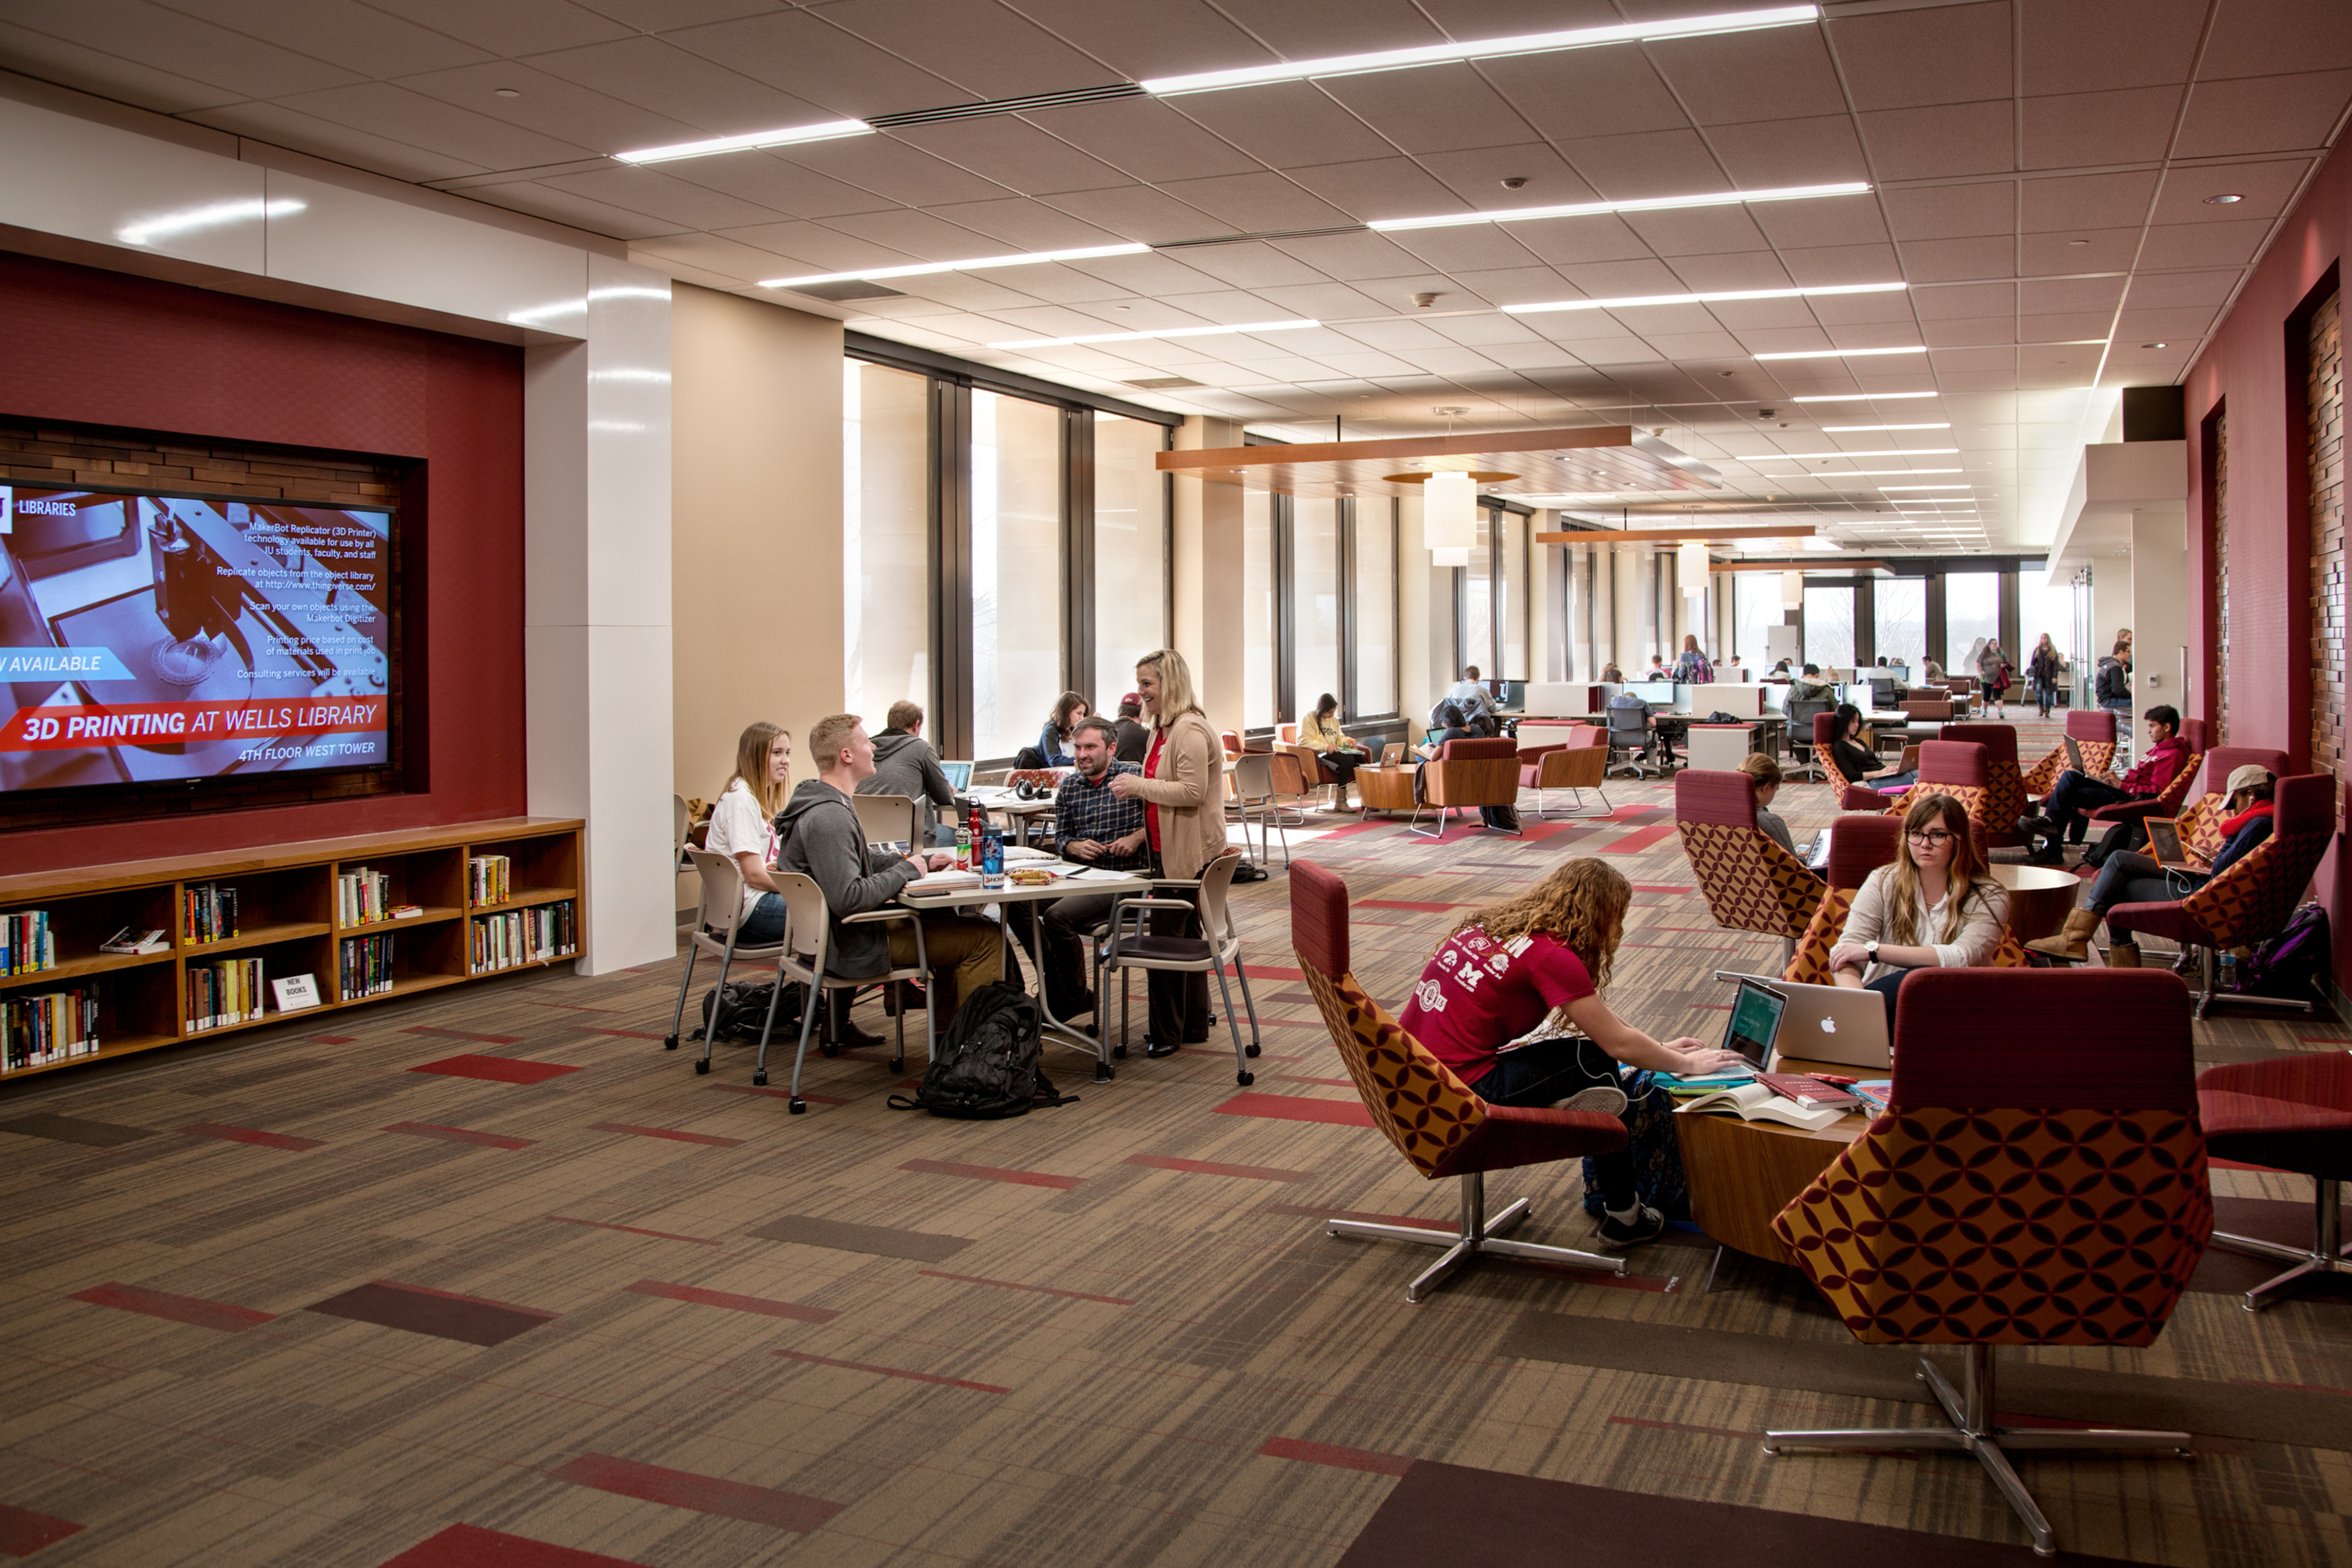 Image of the Learning Commons at Wells Library